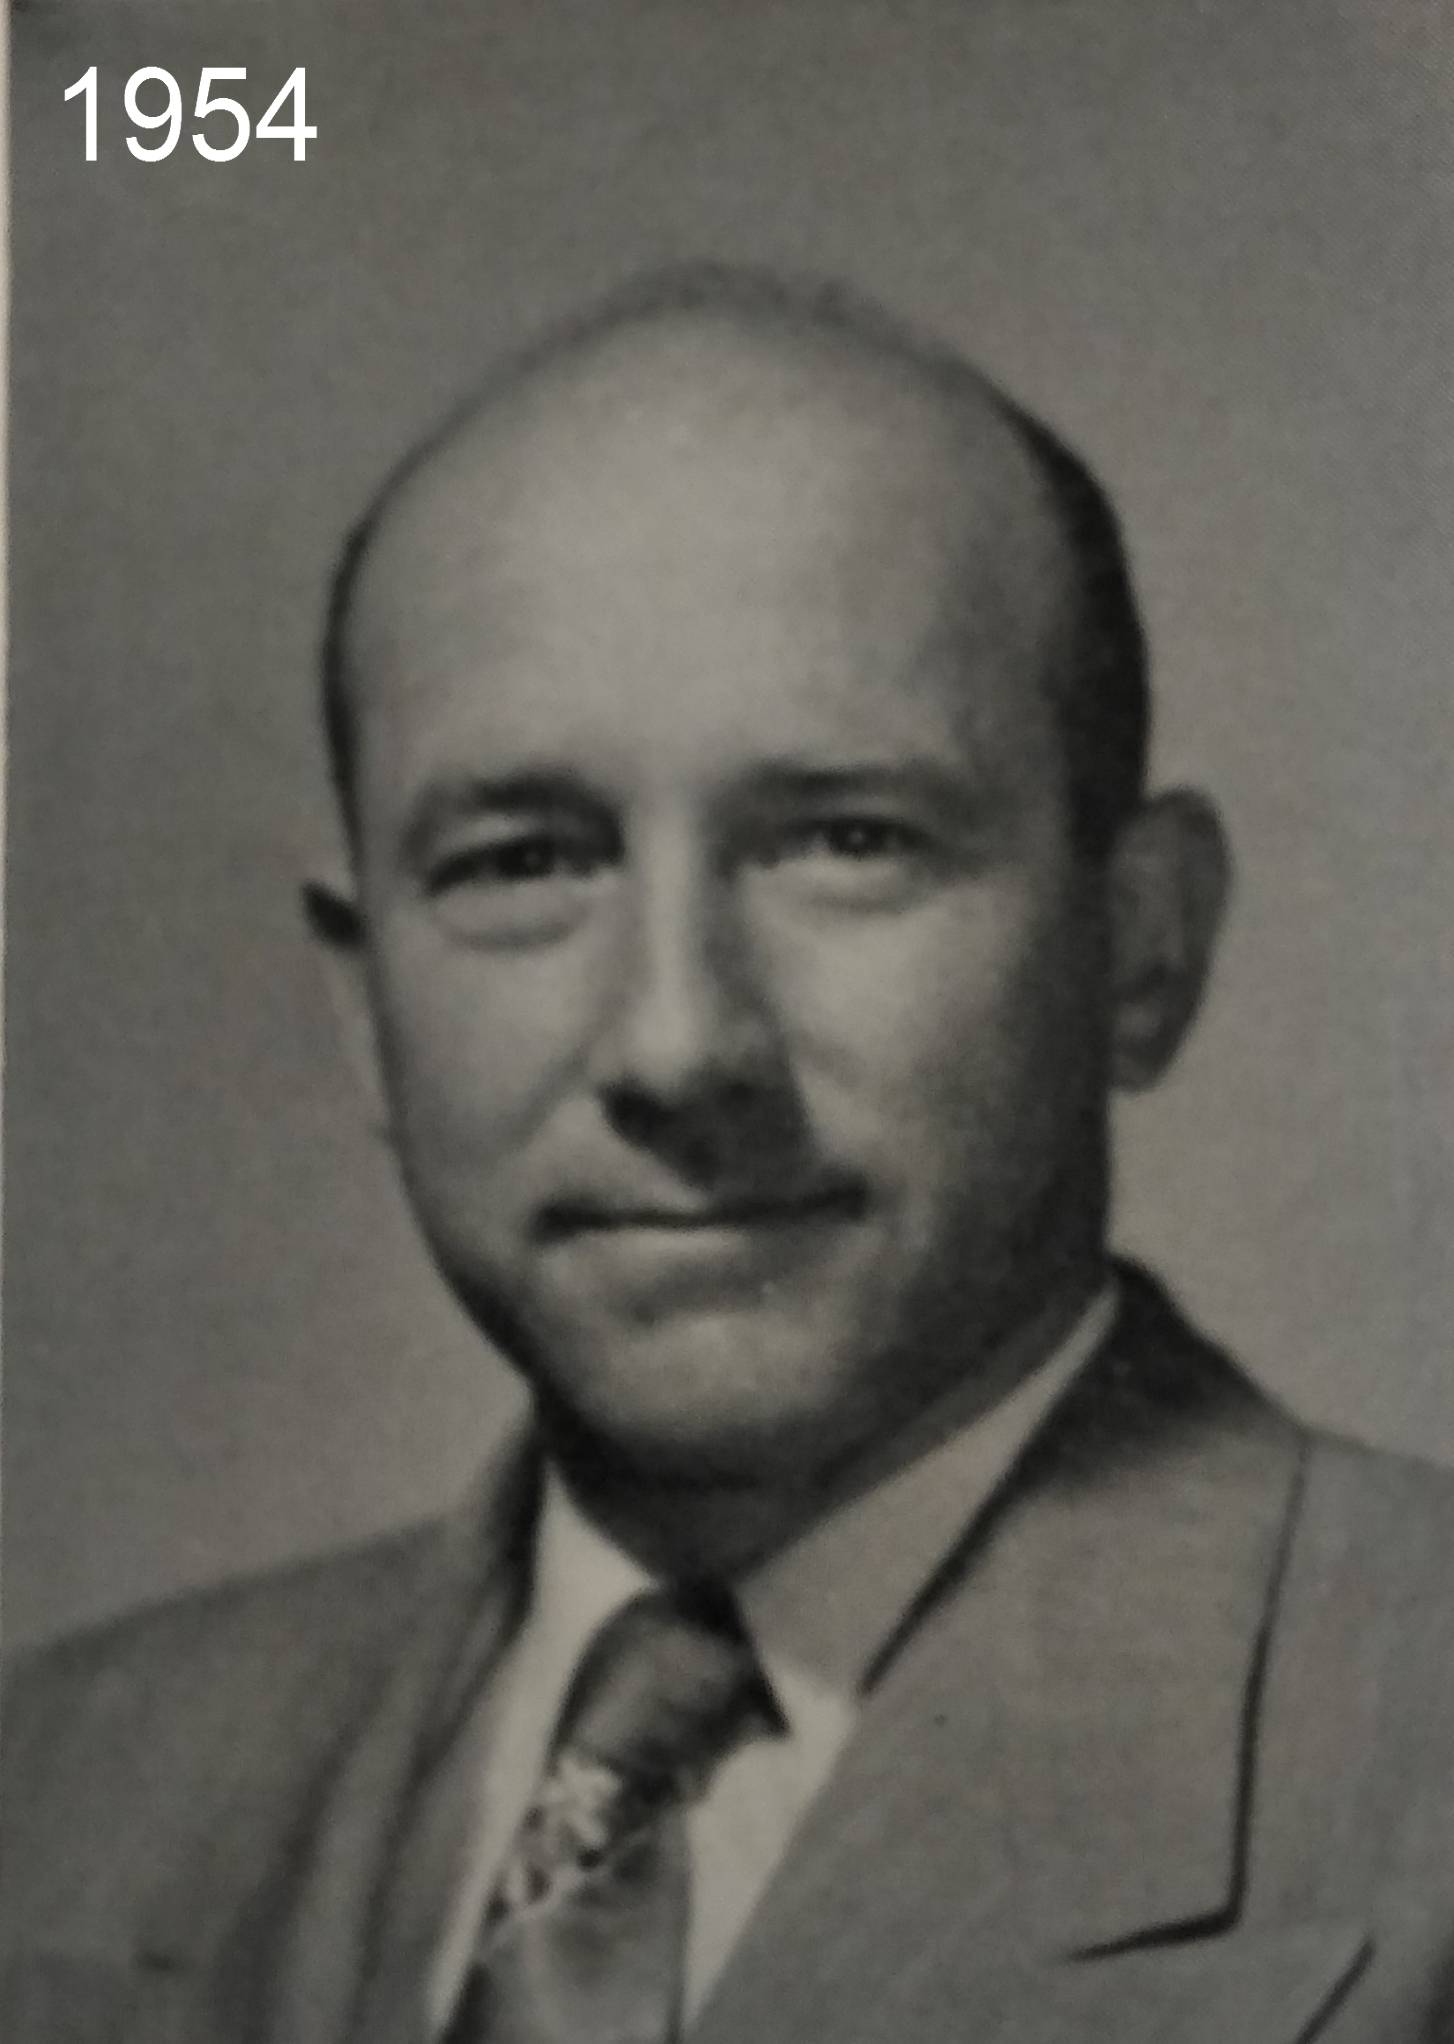 Picture of Alvin Parker from 1954